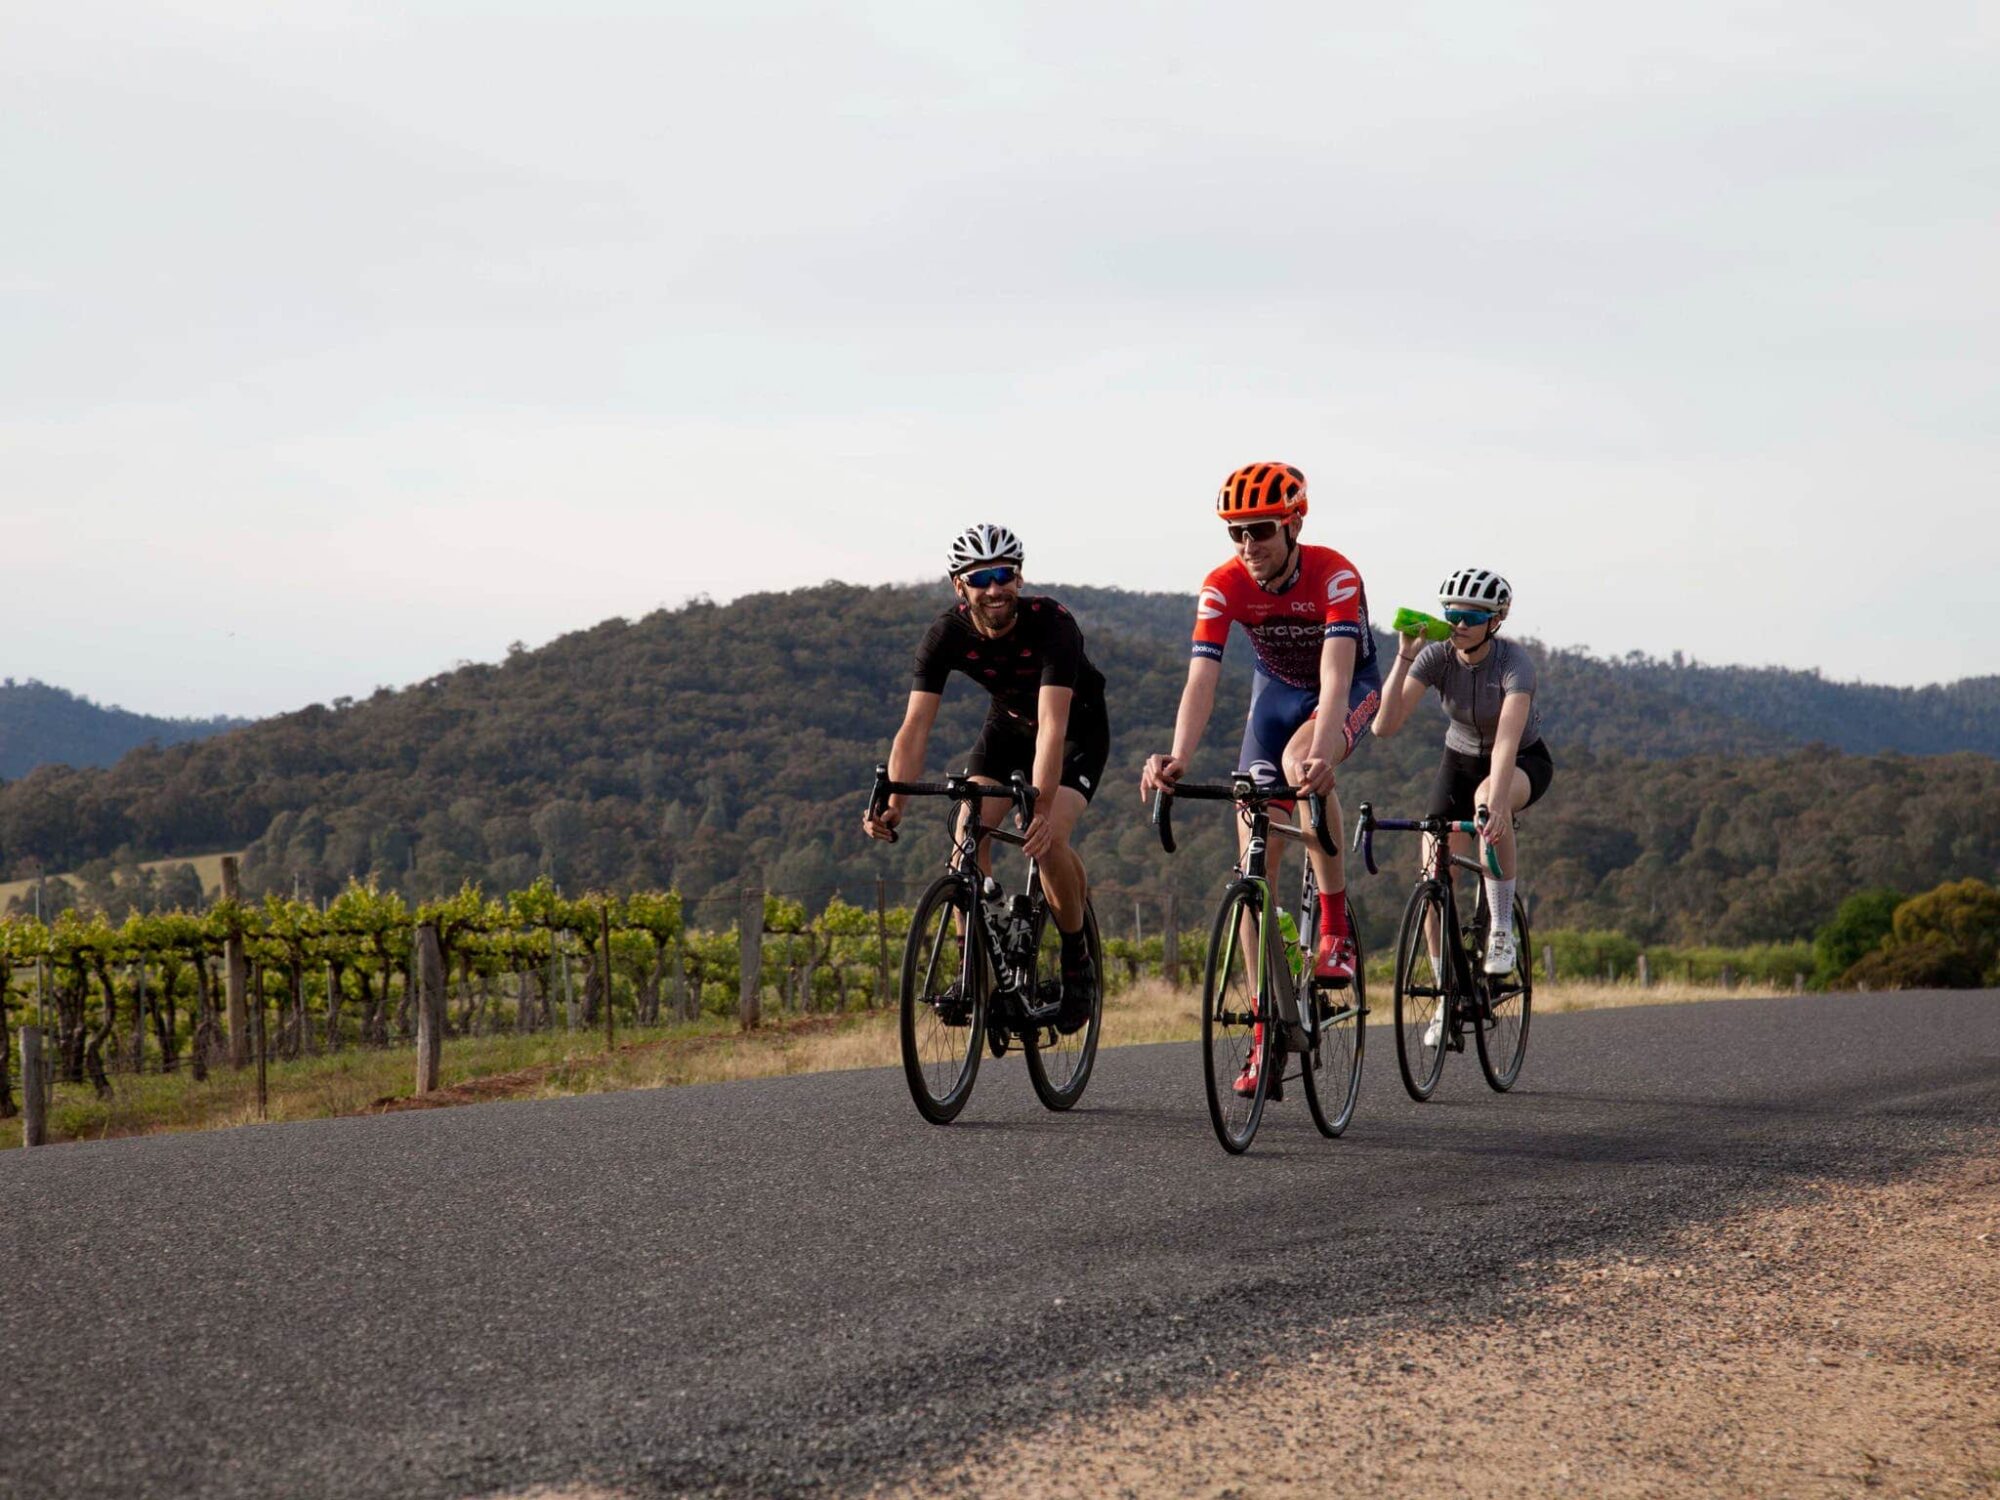 Road cyclists, grape vines on side of road, hills in the background, sunny day